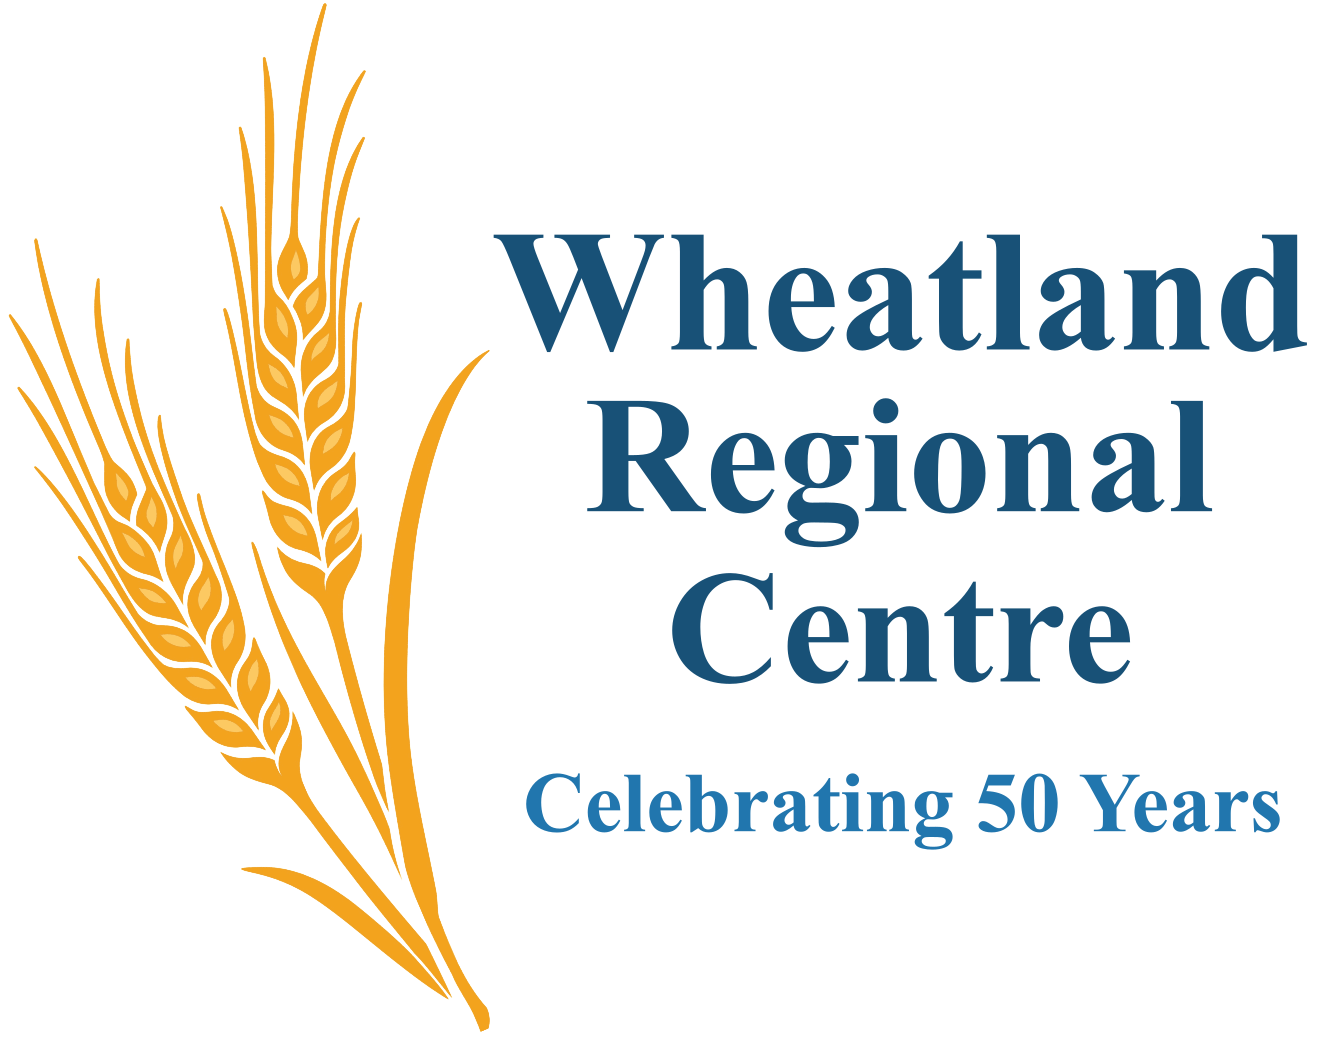 Wheatland Regional Centre | Rosetown, Saskatchewan opportunities and support for individuals with disabilities